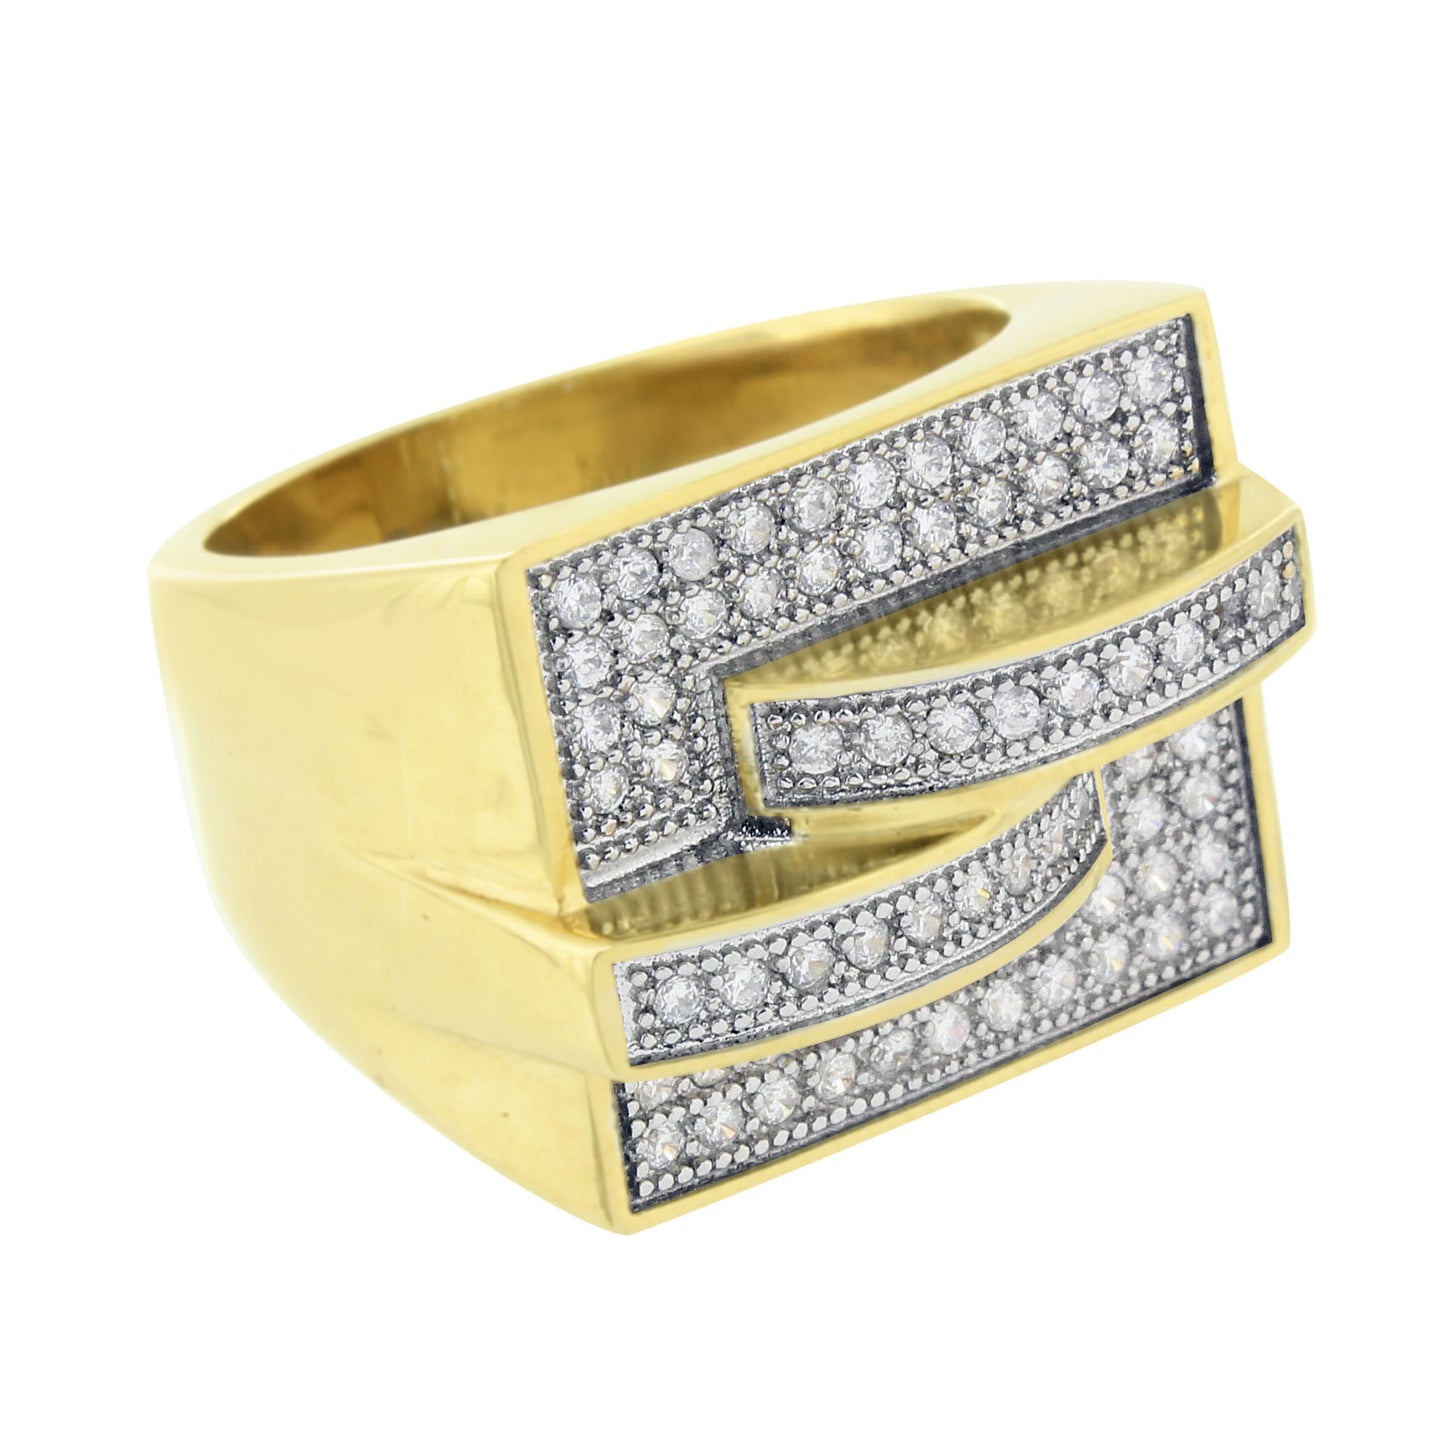 Stainless Steel Mens Ring Gold Finish Wedding Simulated Diamonds Engagement Sale